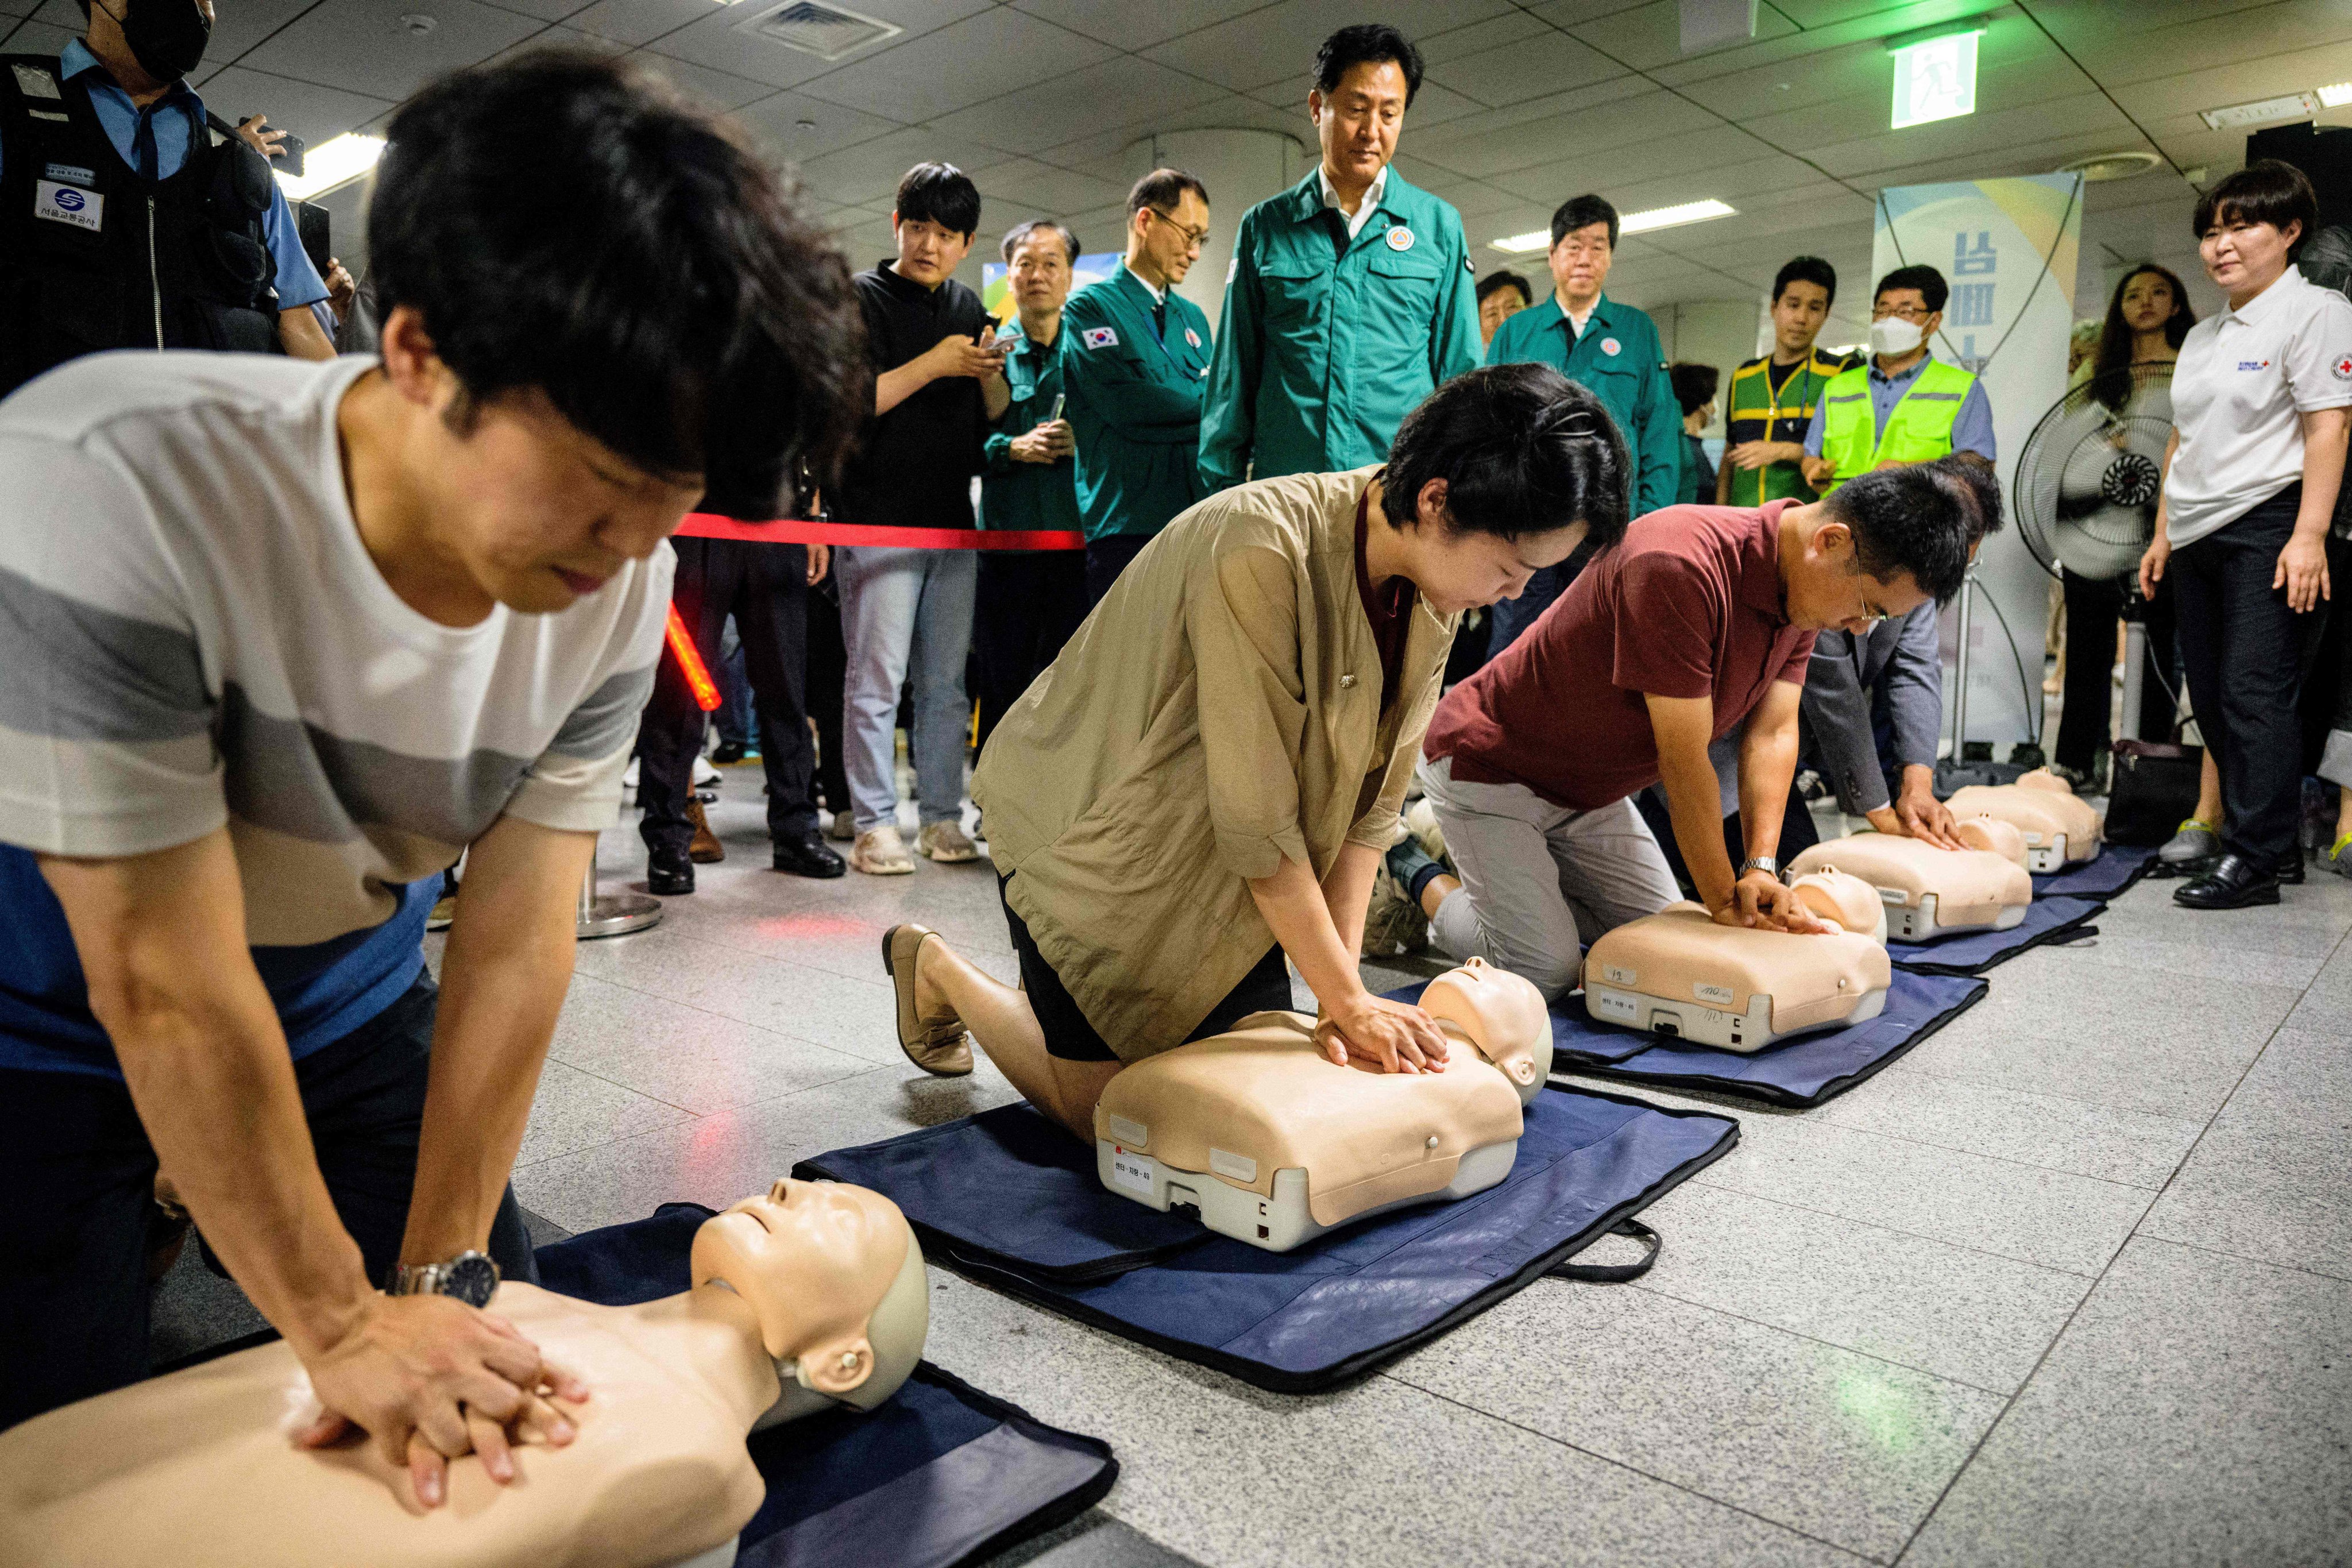 People receive CPR training, practicing on dummies, during a civil defence drill against possible attacks by North Korea, in an underground train station in Seoul on Wednesday. Photo: AFP